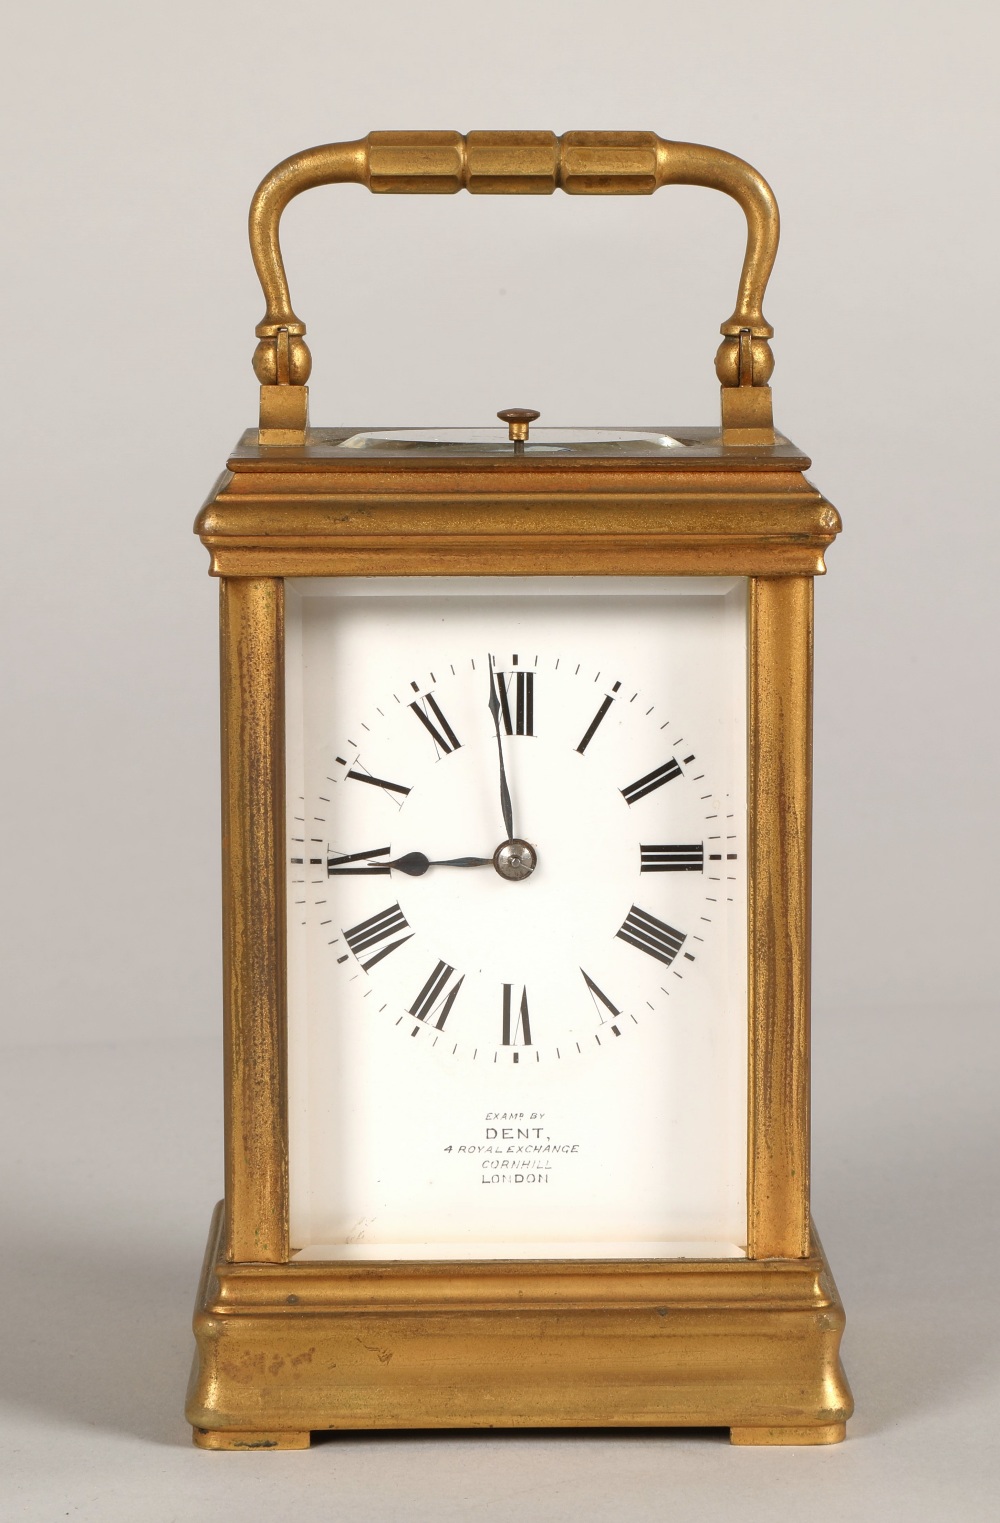 French brass repeating carriage clock, engraved AIGUILLES on the back,  Examp by Dent, 4 Royal